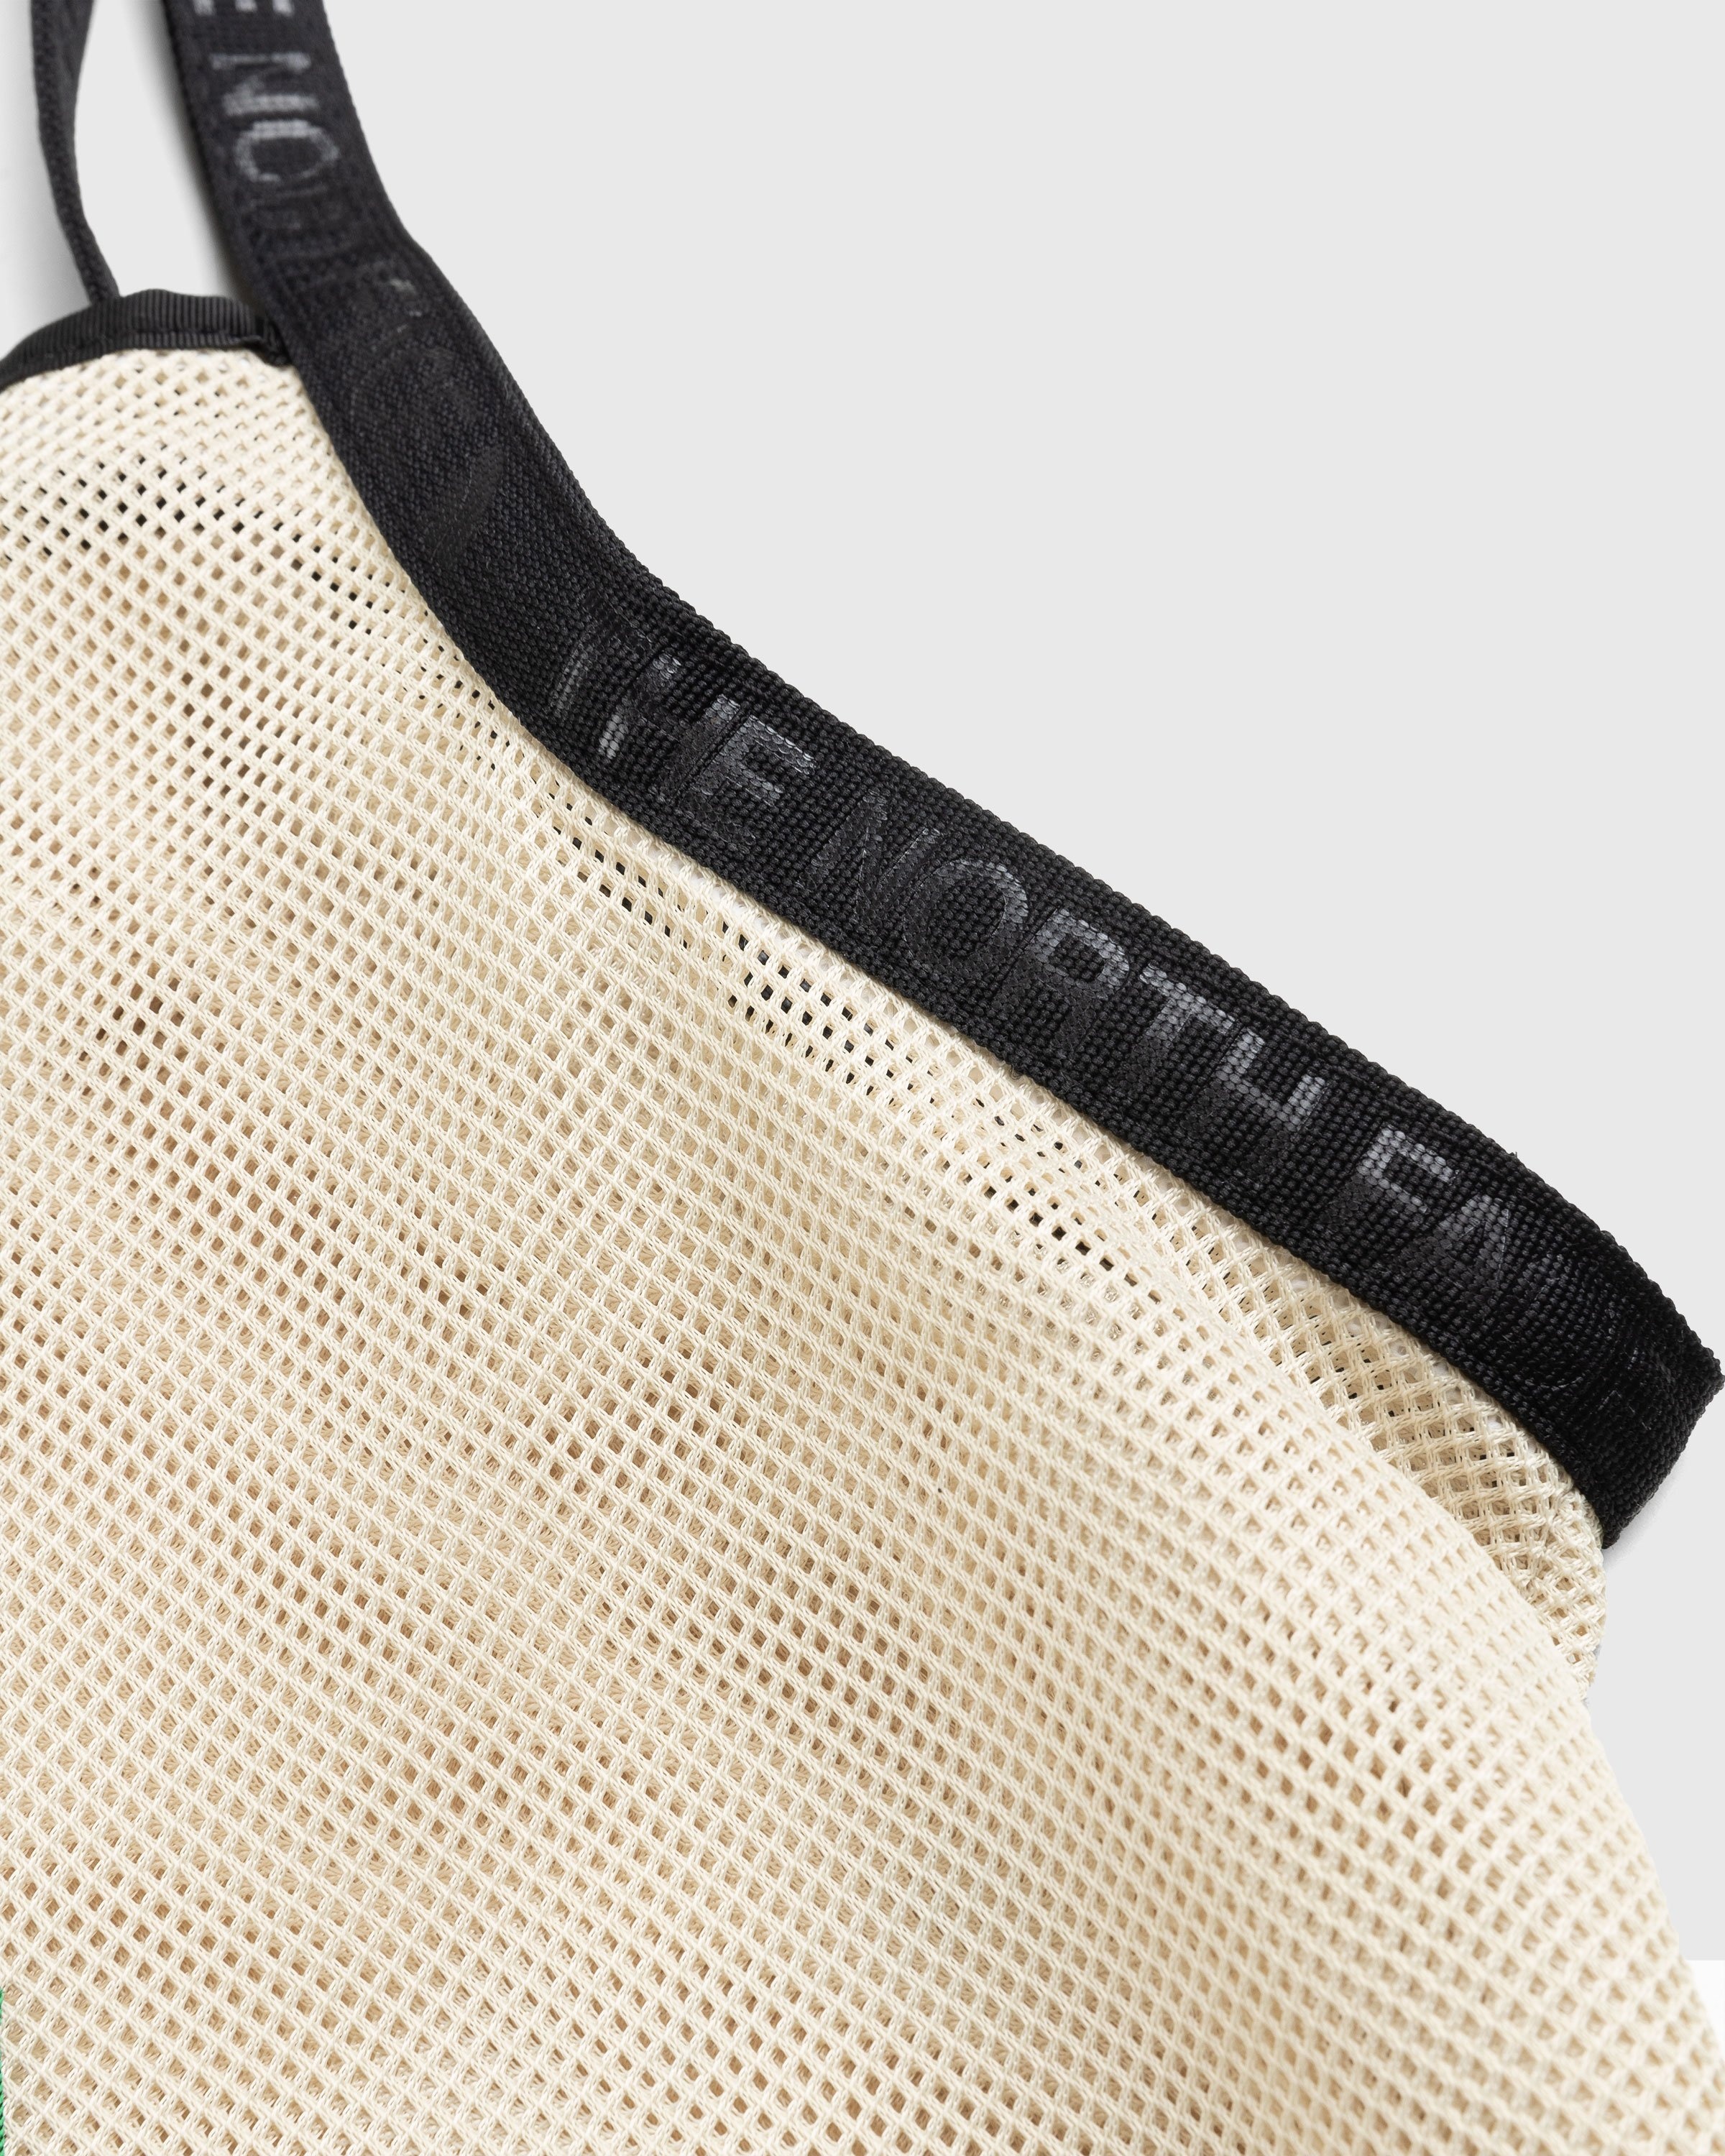 The North Face – Circular Tote Gravel - Bags - Beige - Image 6